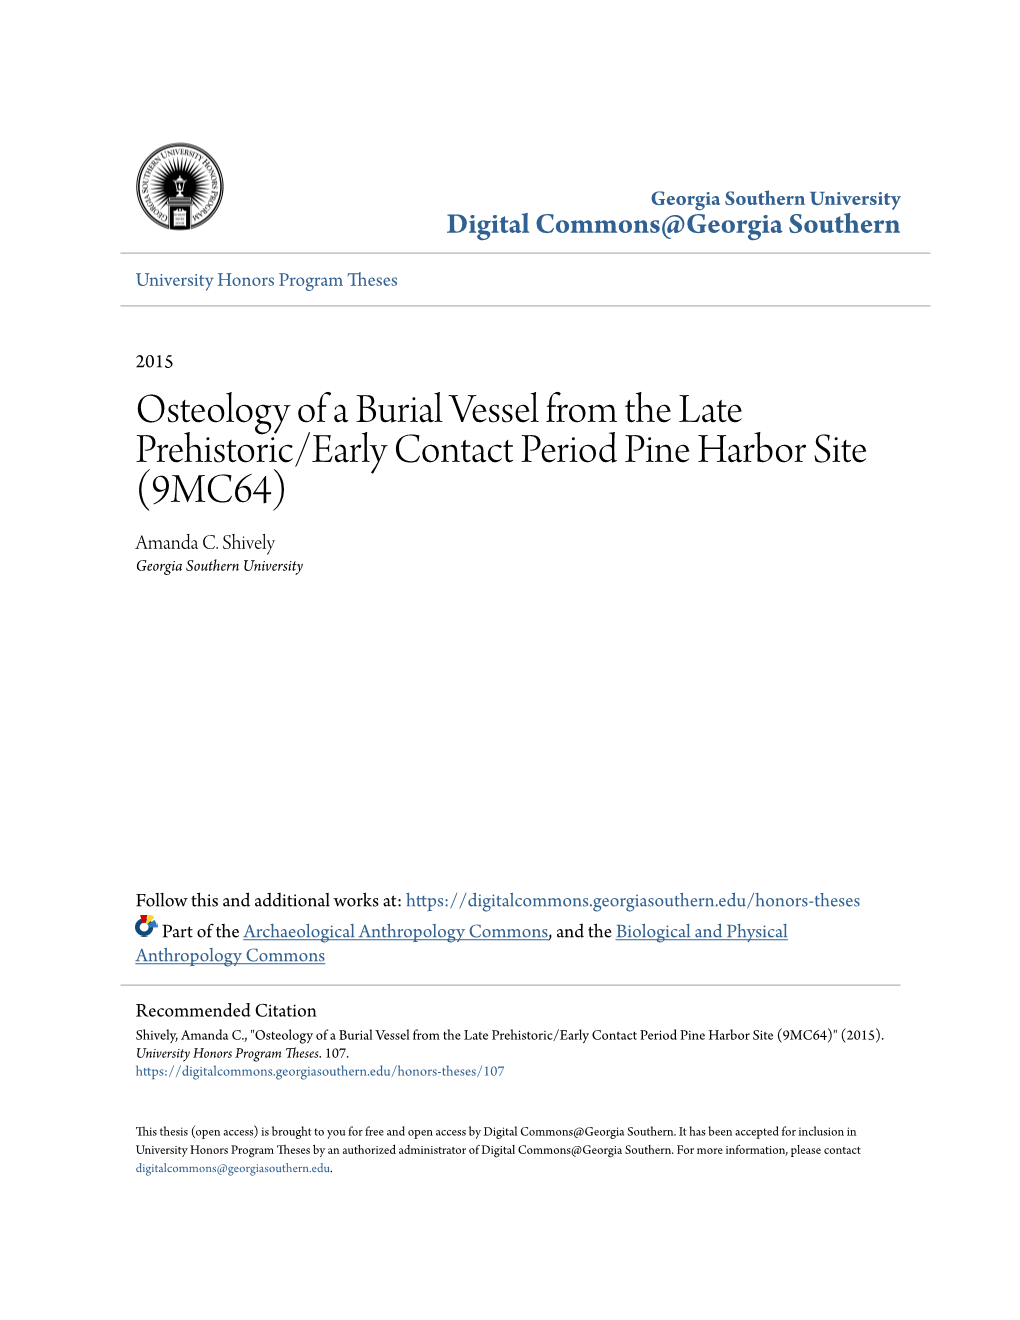 Osteology of a Burial Vessel from the Late Prehistoric/Early Contact Period Pine Harbor Site (9MC64) Amanda C